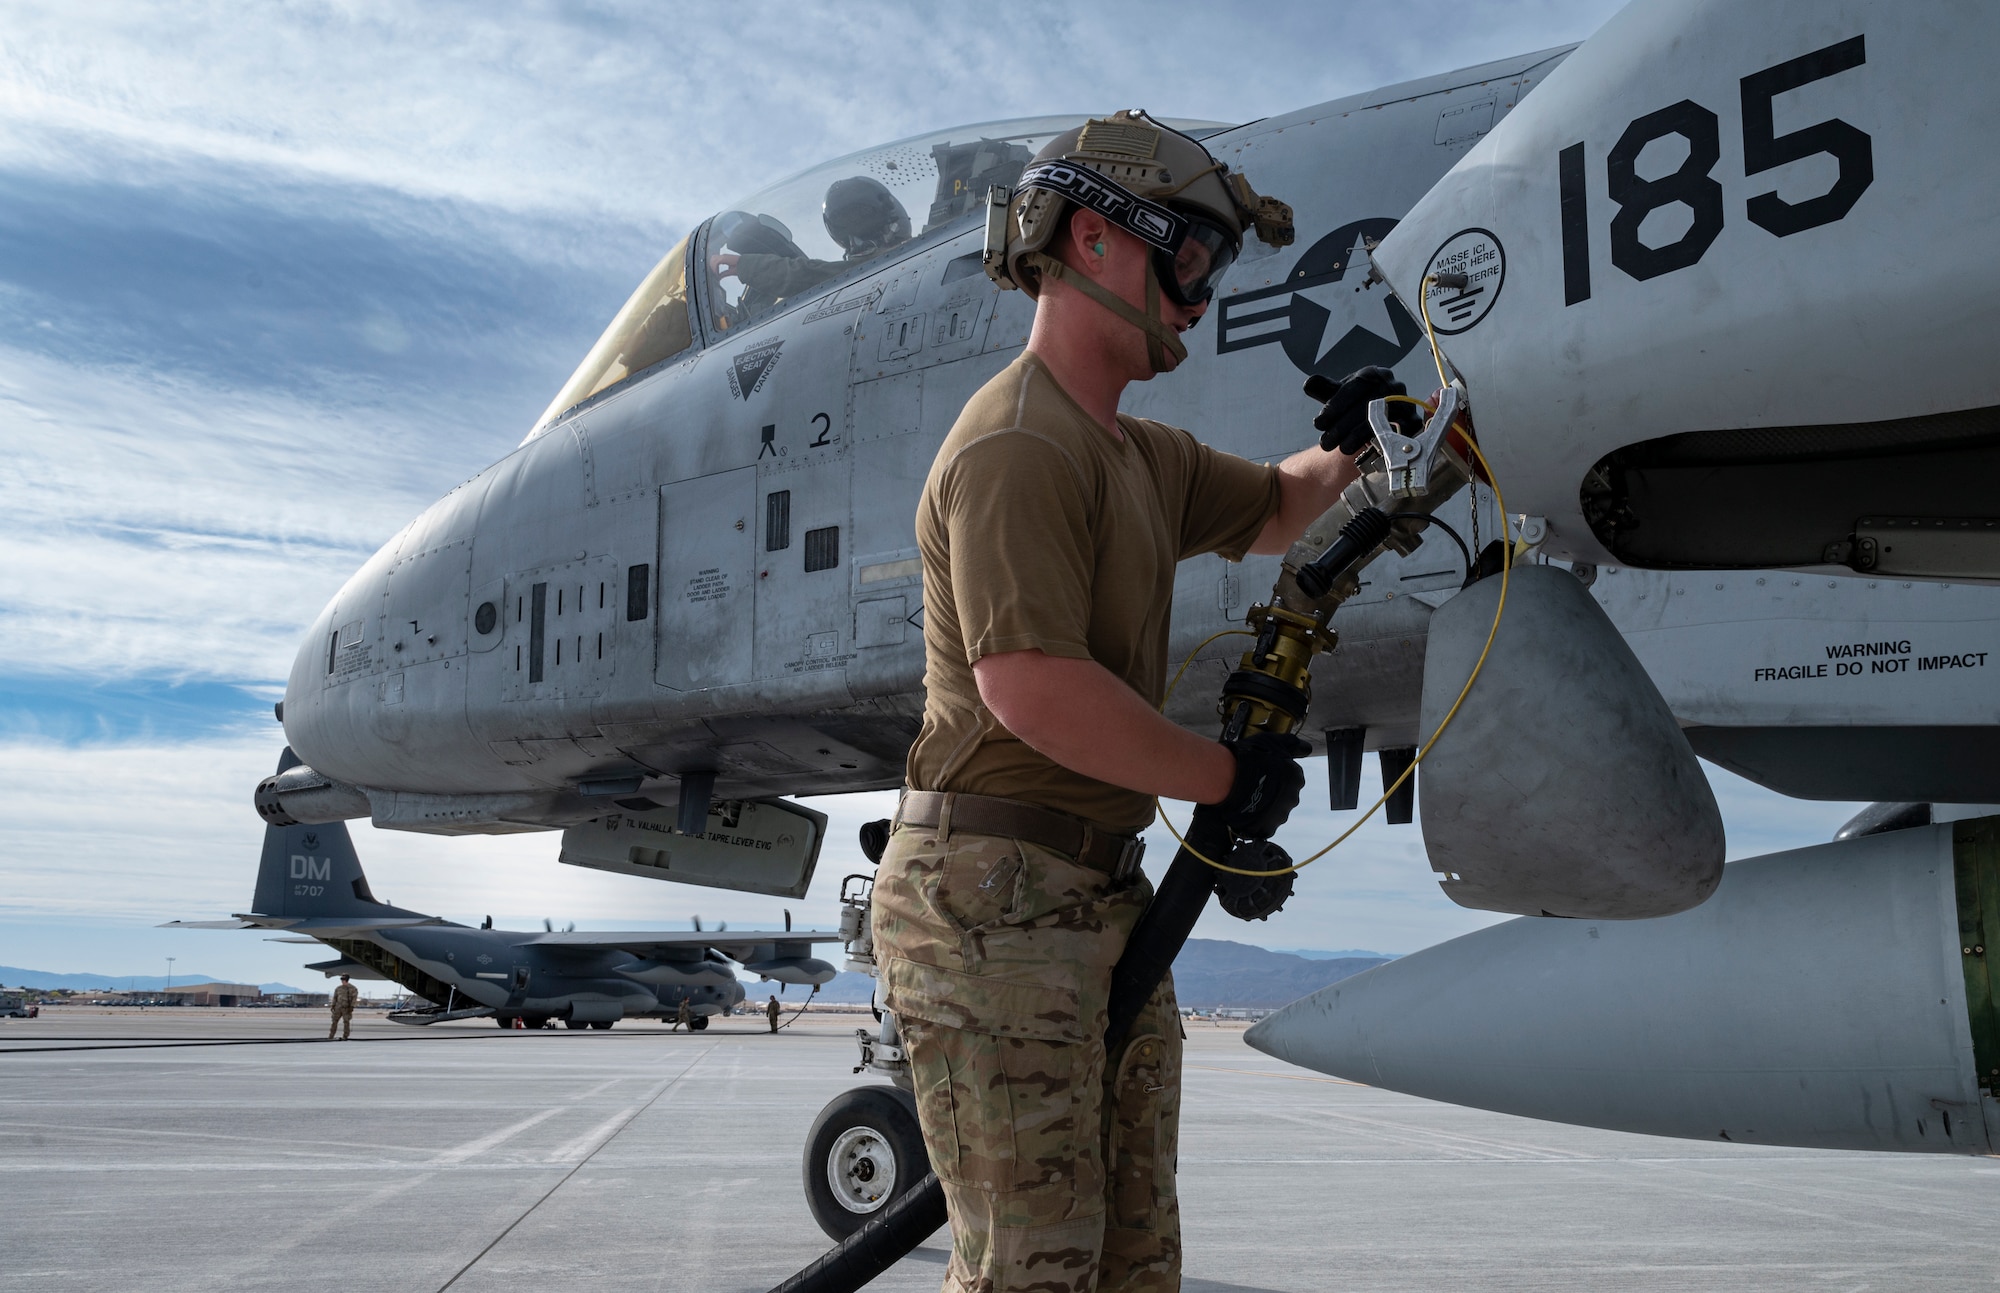 U.S. Air Force Staff Sgt. Daniel Watford, Forward Area Refueling Point (FARP) Operator assigned to the 355th Logistics Readiness Squadron, Davis-Monthan Air Force Base, Arizona, fuels up an A-10C Thunderbolt II during Black Flag 22-1 at Nellis AFB, May 10, 2022. Black Flag is focused on developing and validating large force tactics and integration required to deliver combat capability and tactical advantage for the Combat Air Force to build readiness that credibly deters and successfully defeats adversaries. (U.S. Air Force photo by William R. Lewis)